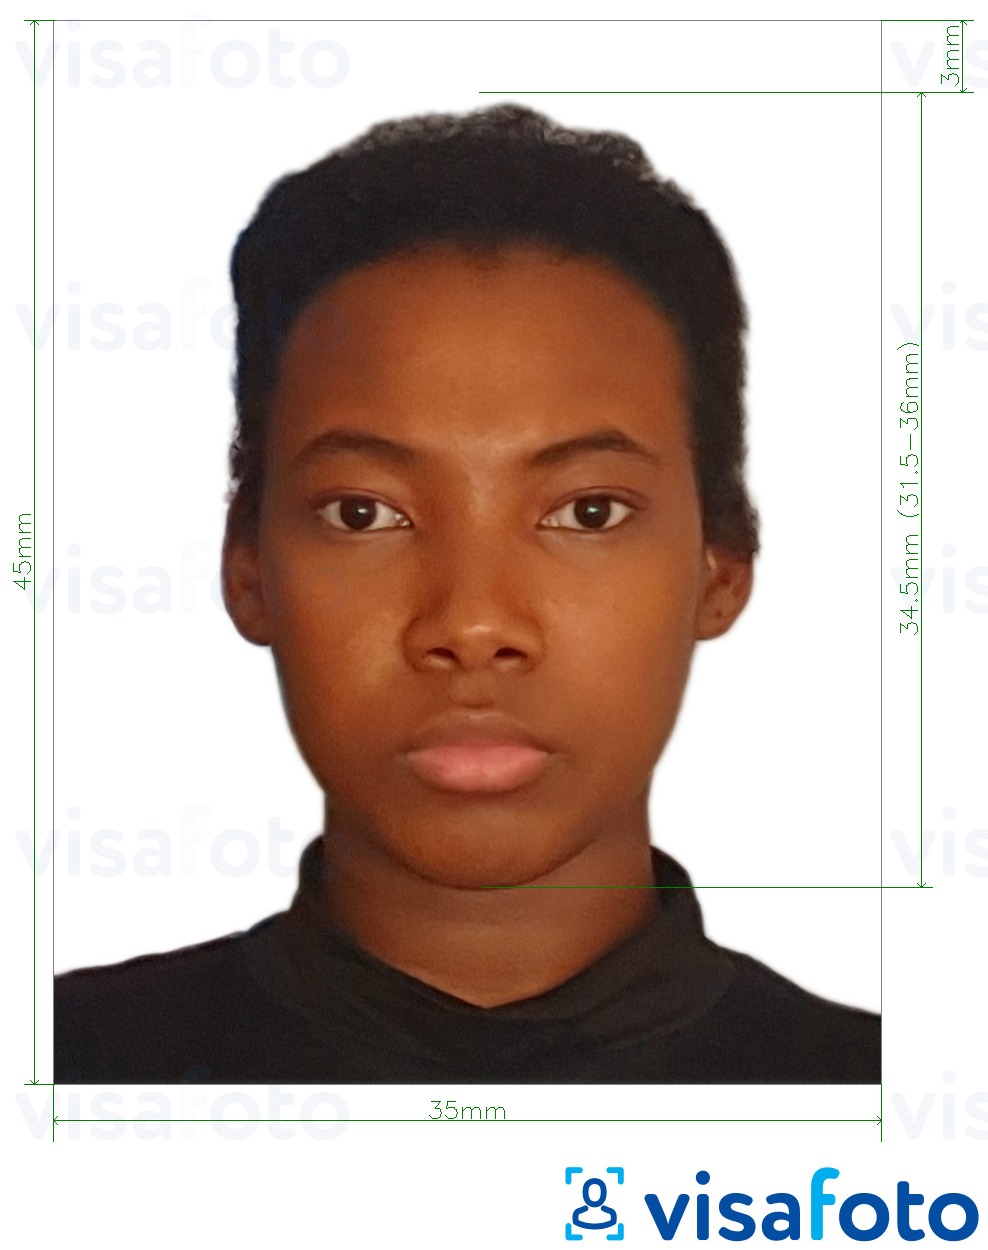 Example of photo for Burkina Faso passport 4.5x3.5 cm (45x35 mm) with exact size specification